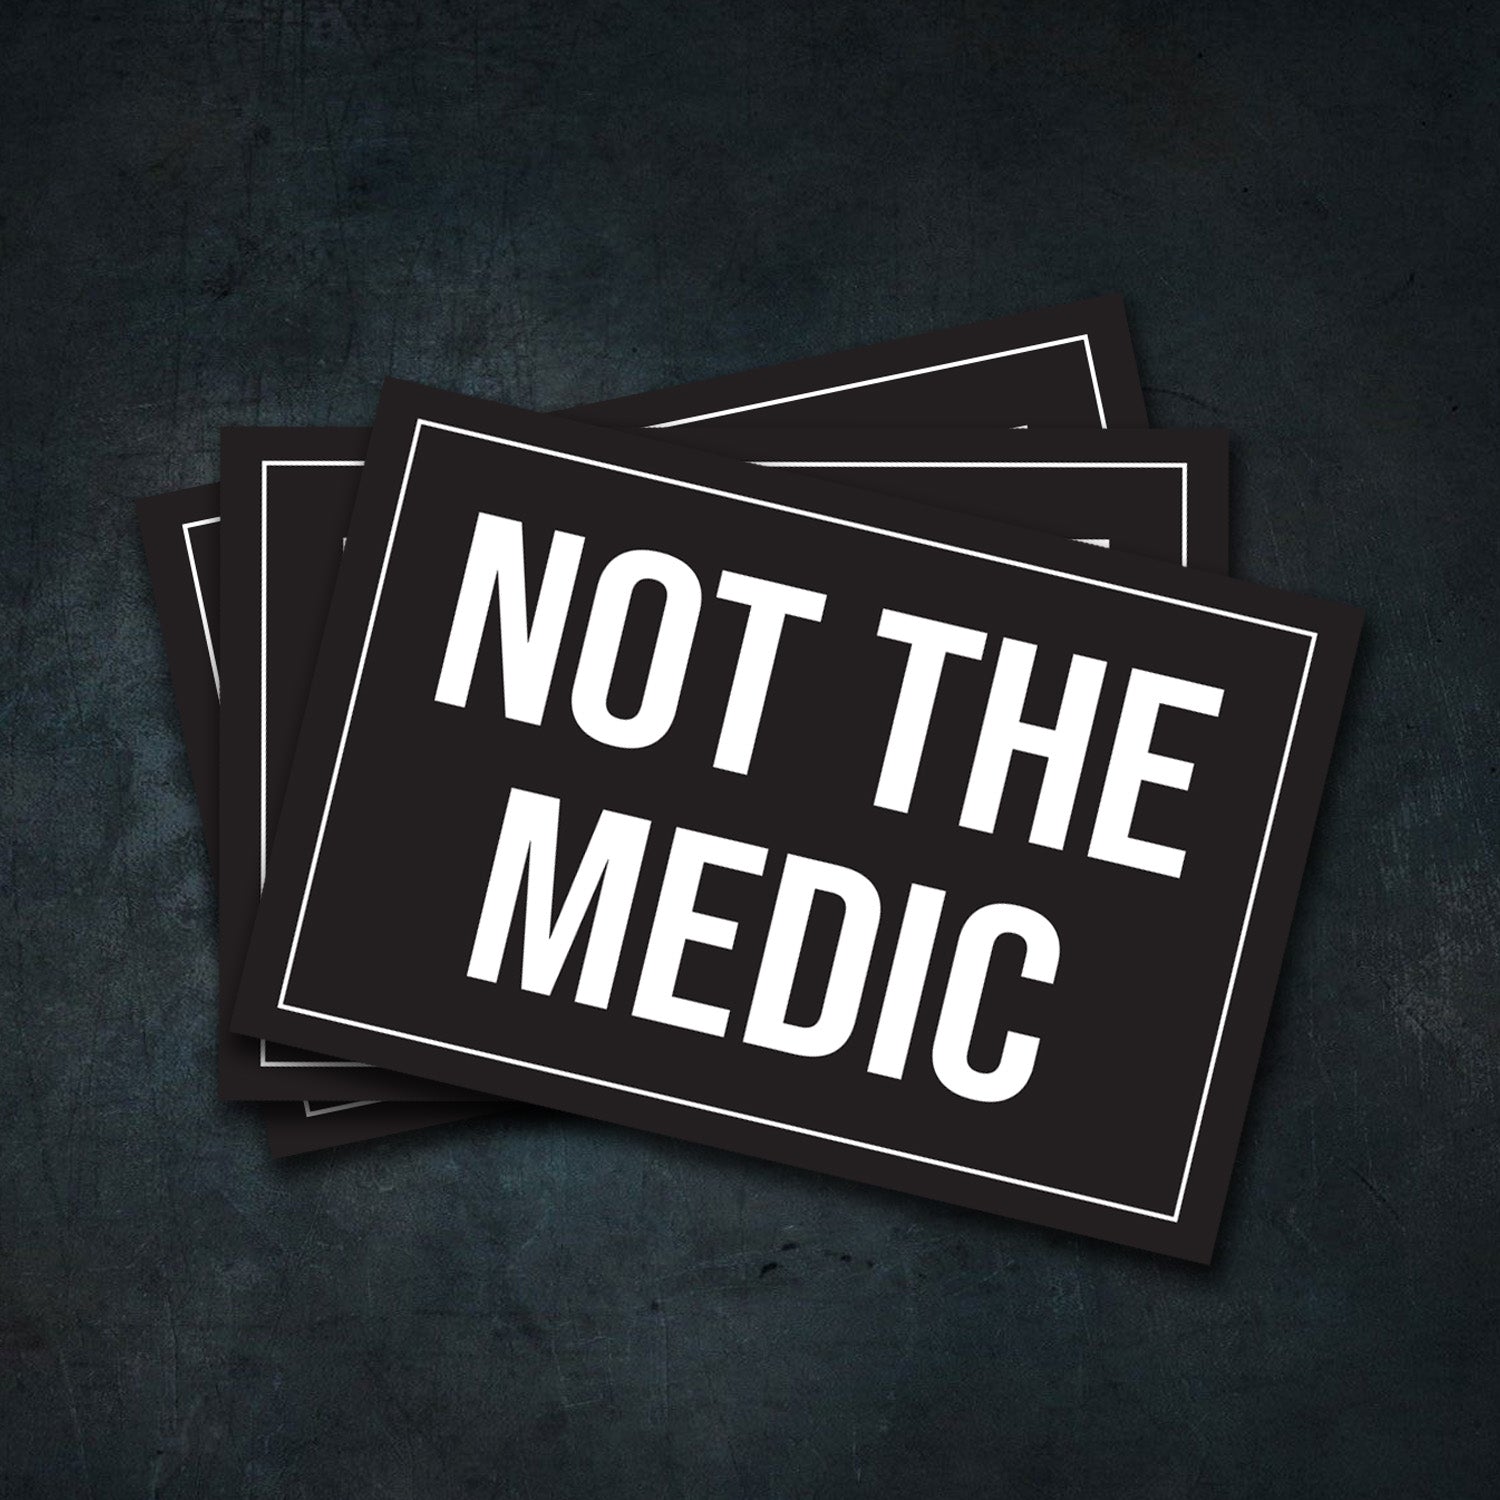 NOT A MEDIC Stickers - 3 Pack